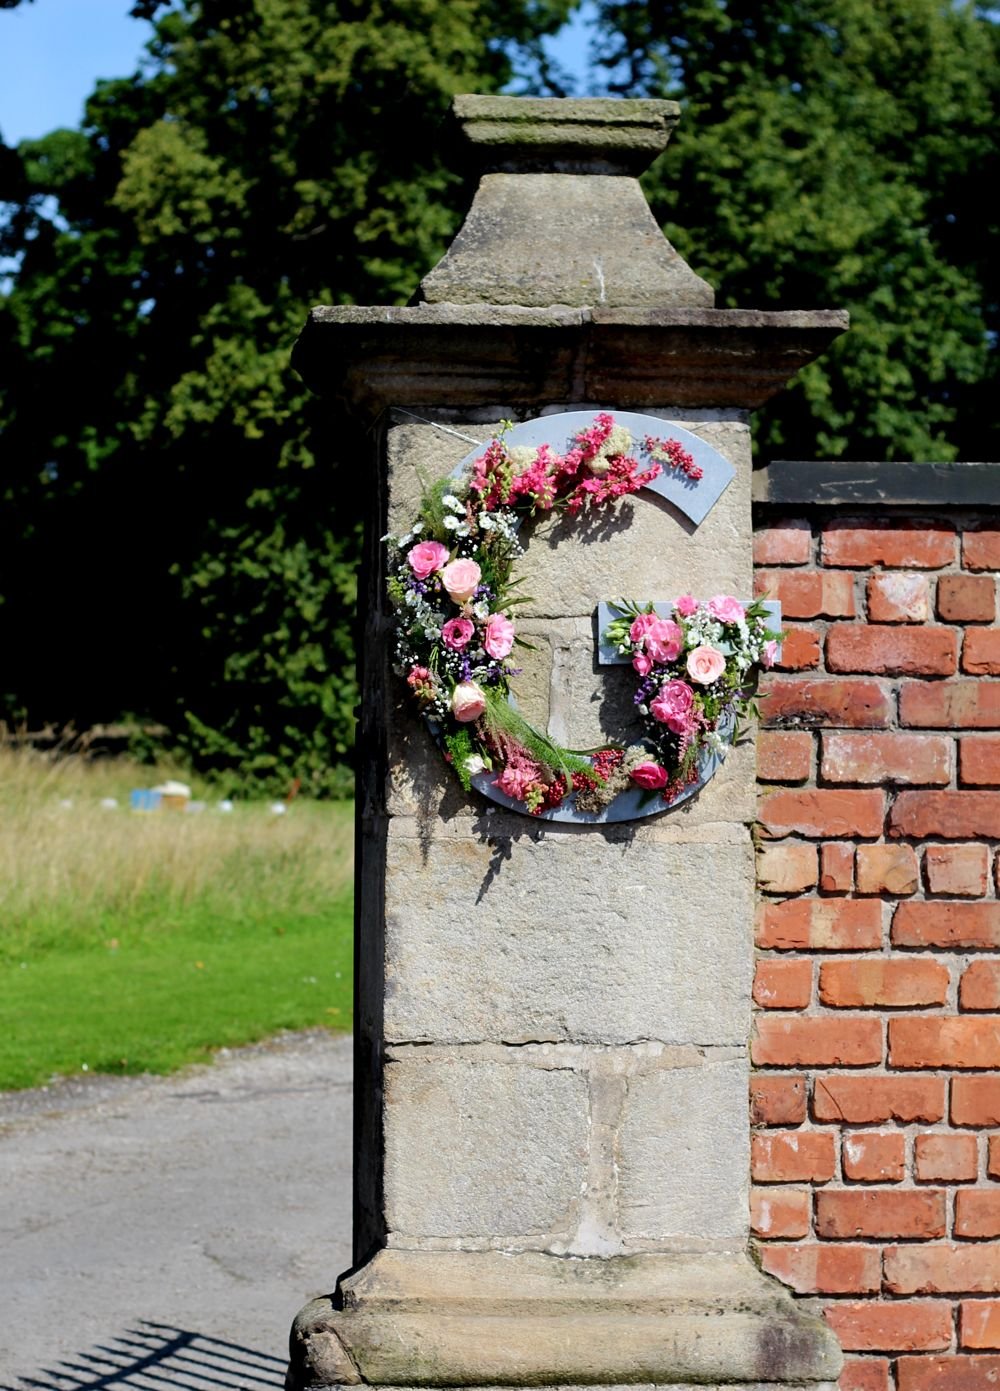 Initials in flowers on the entrance pillars at Meols hall